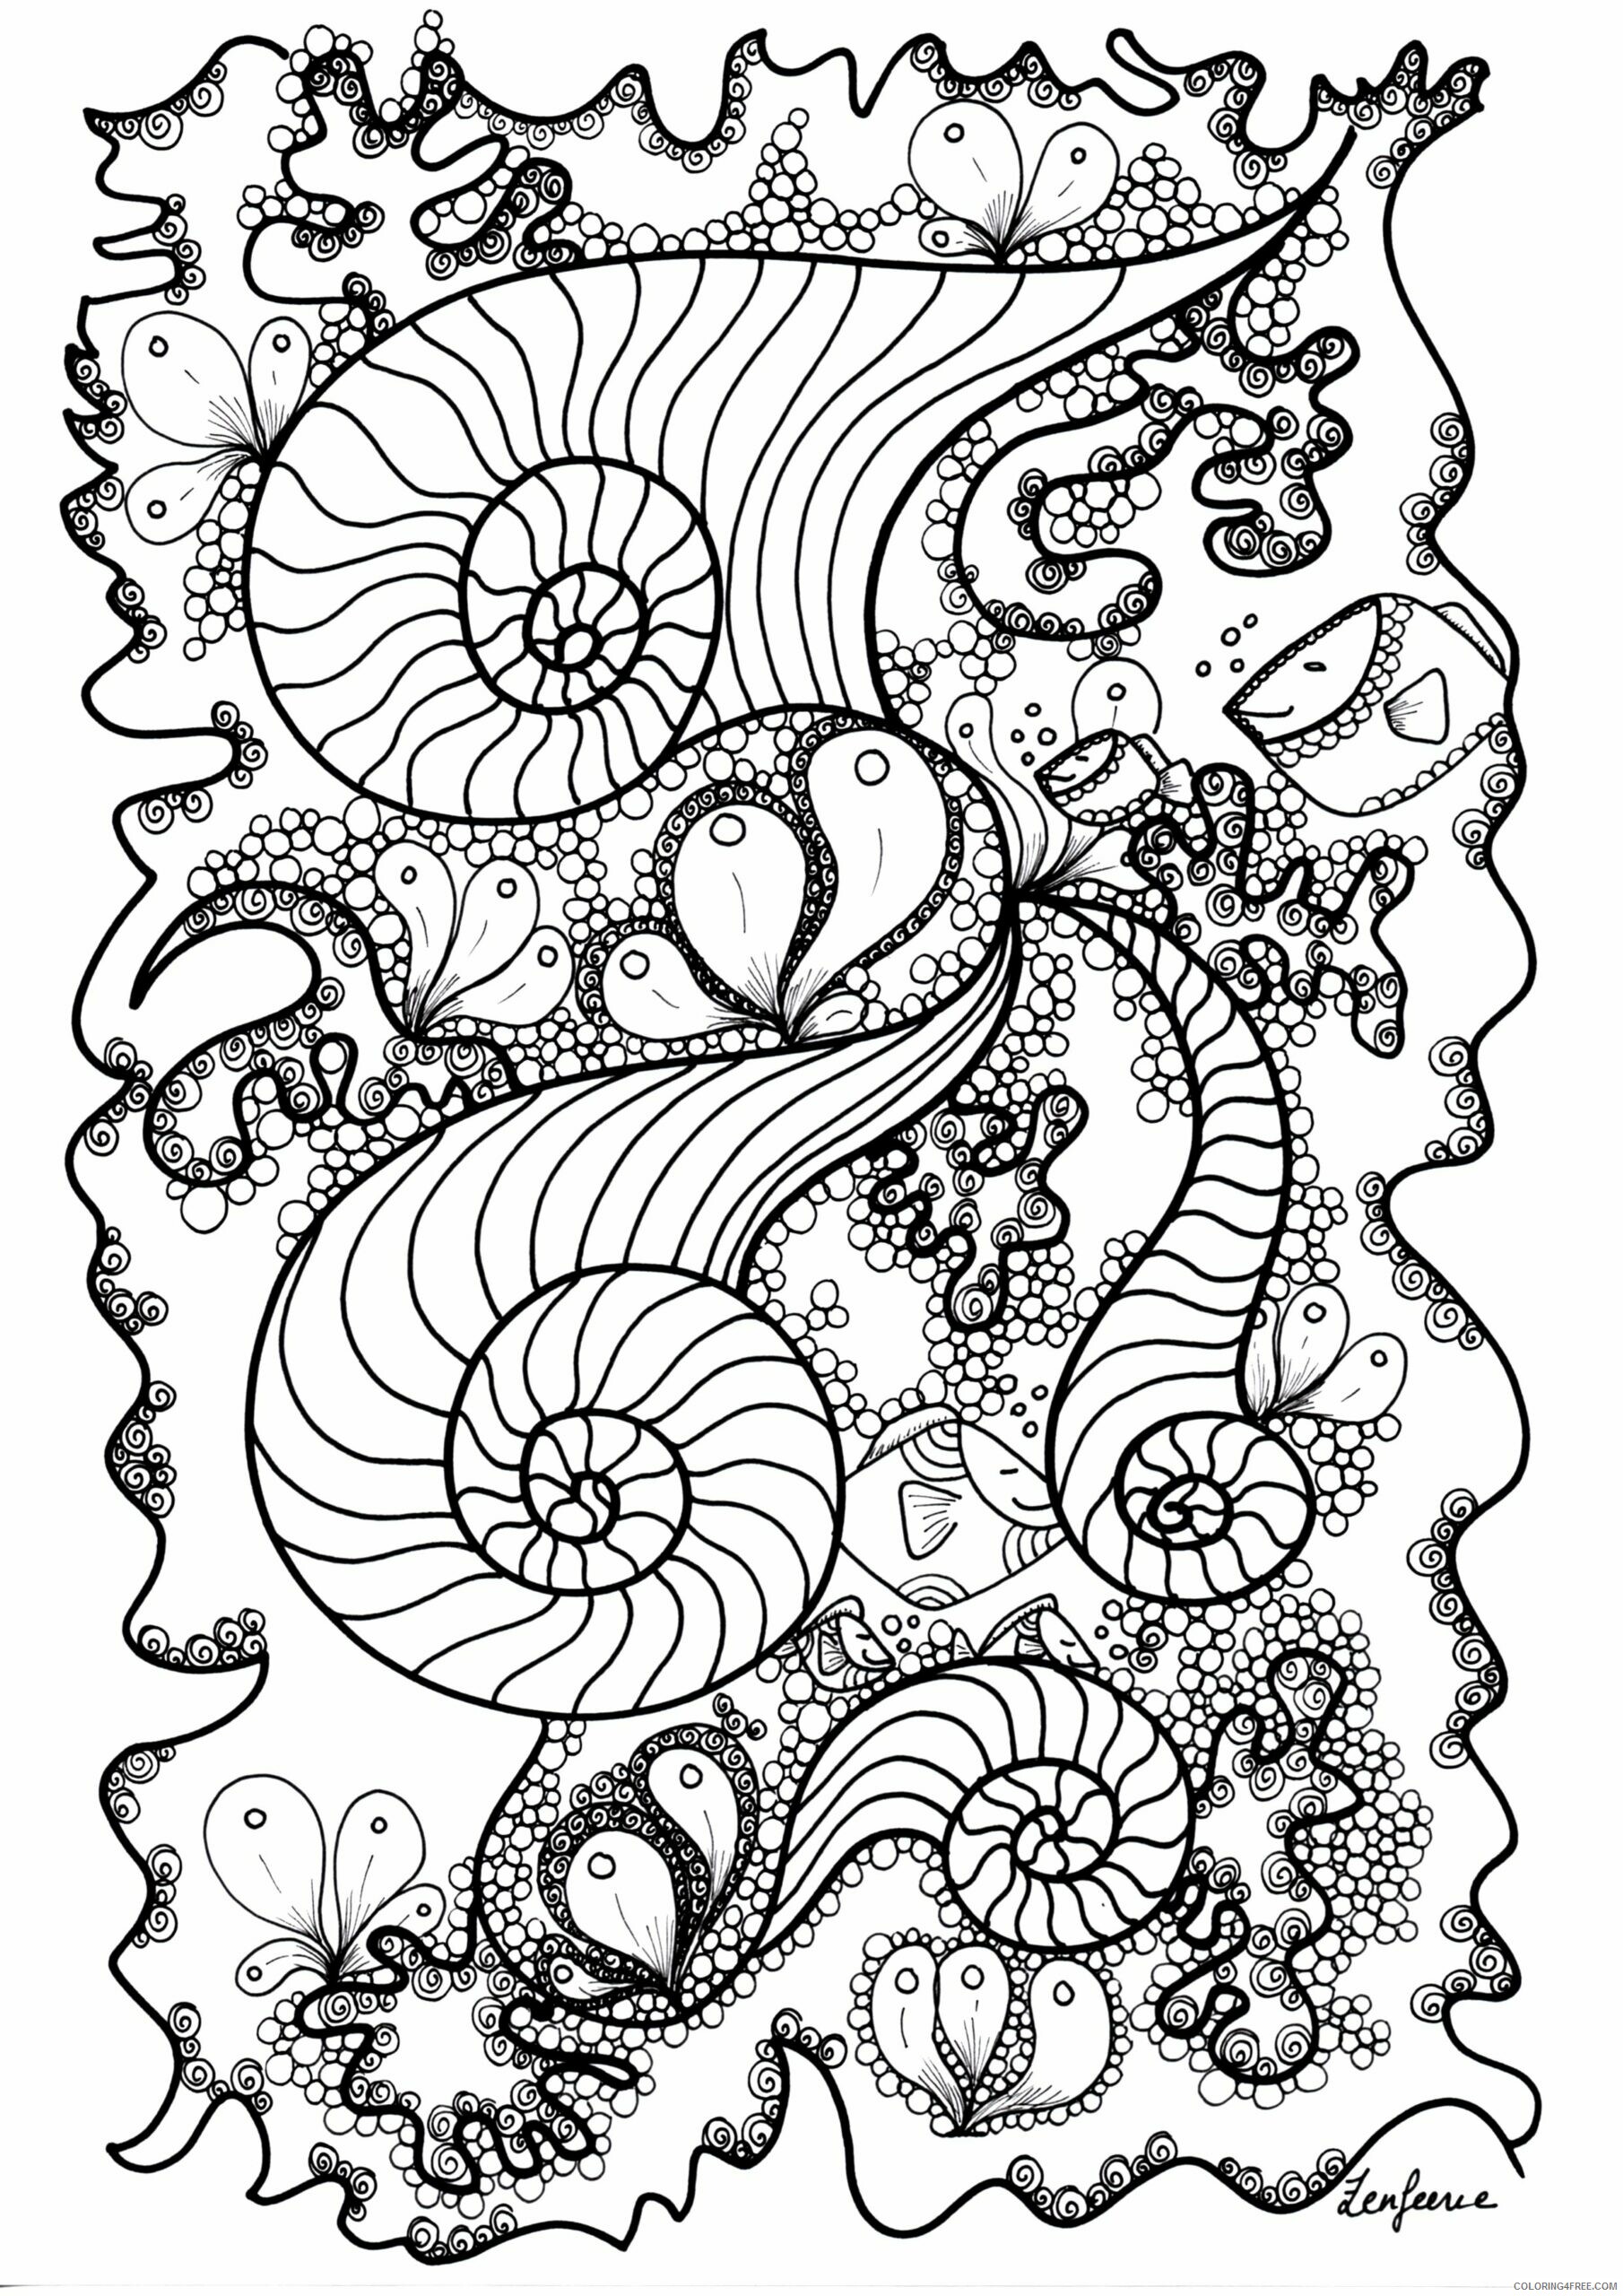 Adult Zentangle Coloring Pages coloriage adulte poisson by zenfeerie Printable 2020 116 Coloring4free